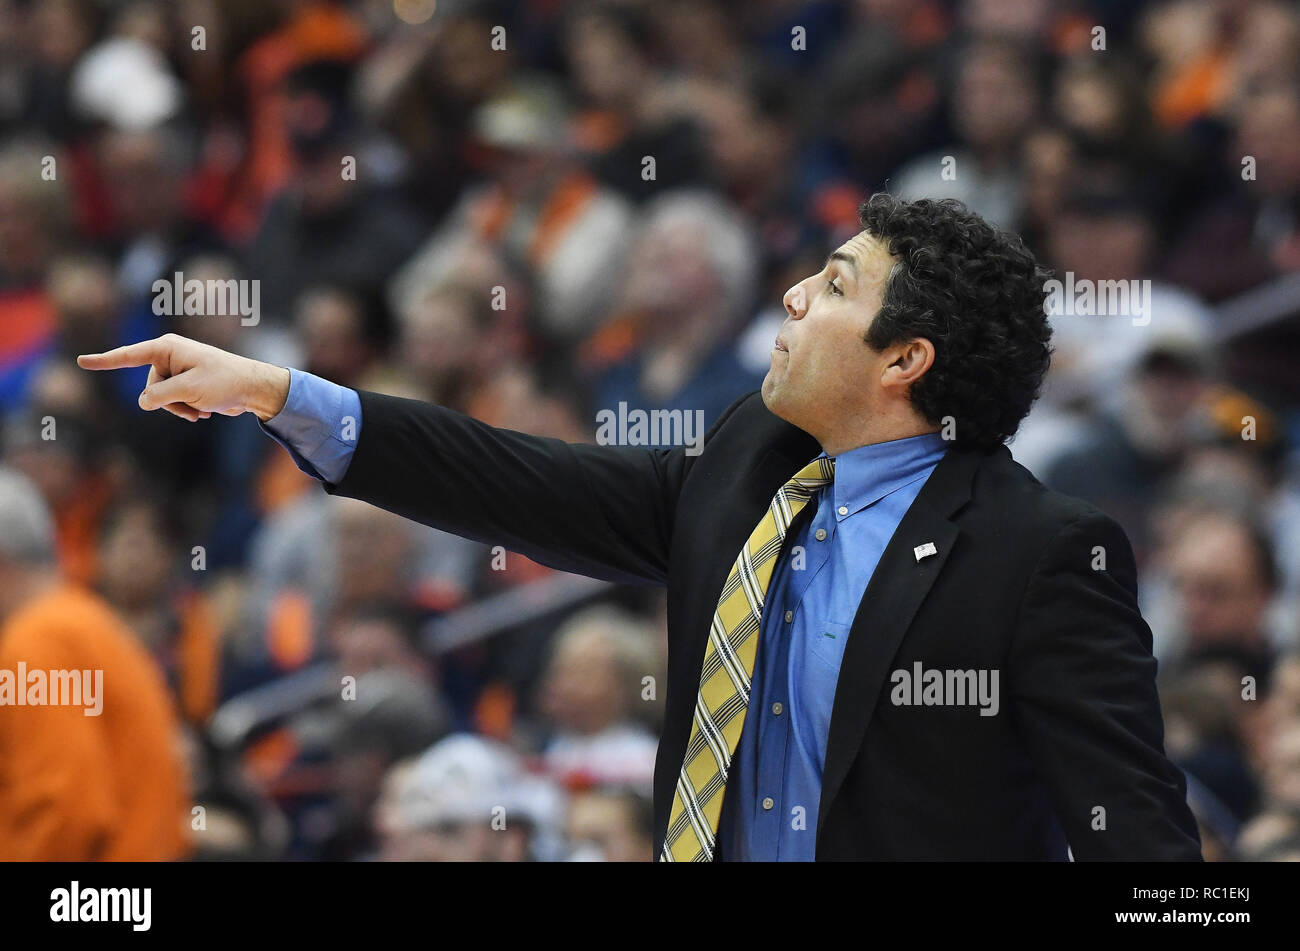 Syracuse, NY, USA. 12th Jan, 2019. Georgia Tech head coach Josh Pastner gives direction during the second half of play. Georgia Tech defeated Syracuse 73-59 at the Carrier Dome in Syracuse, NY. Photo by Alan Schwartz/Cal Sport Media/Alamy Live News Stock Photo